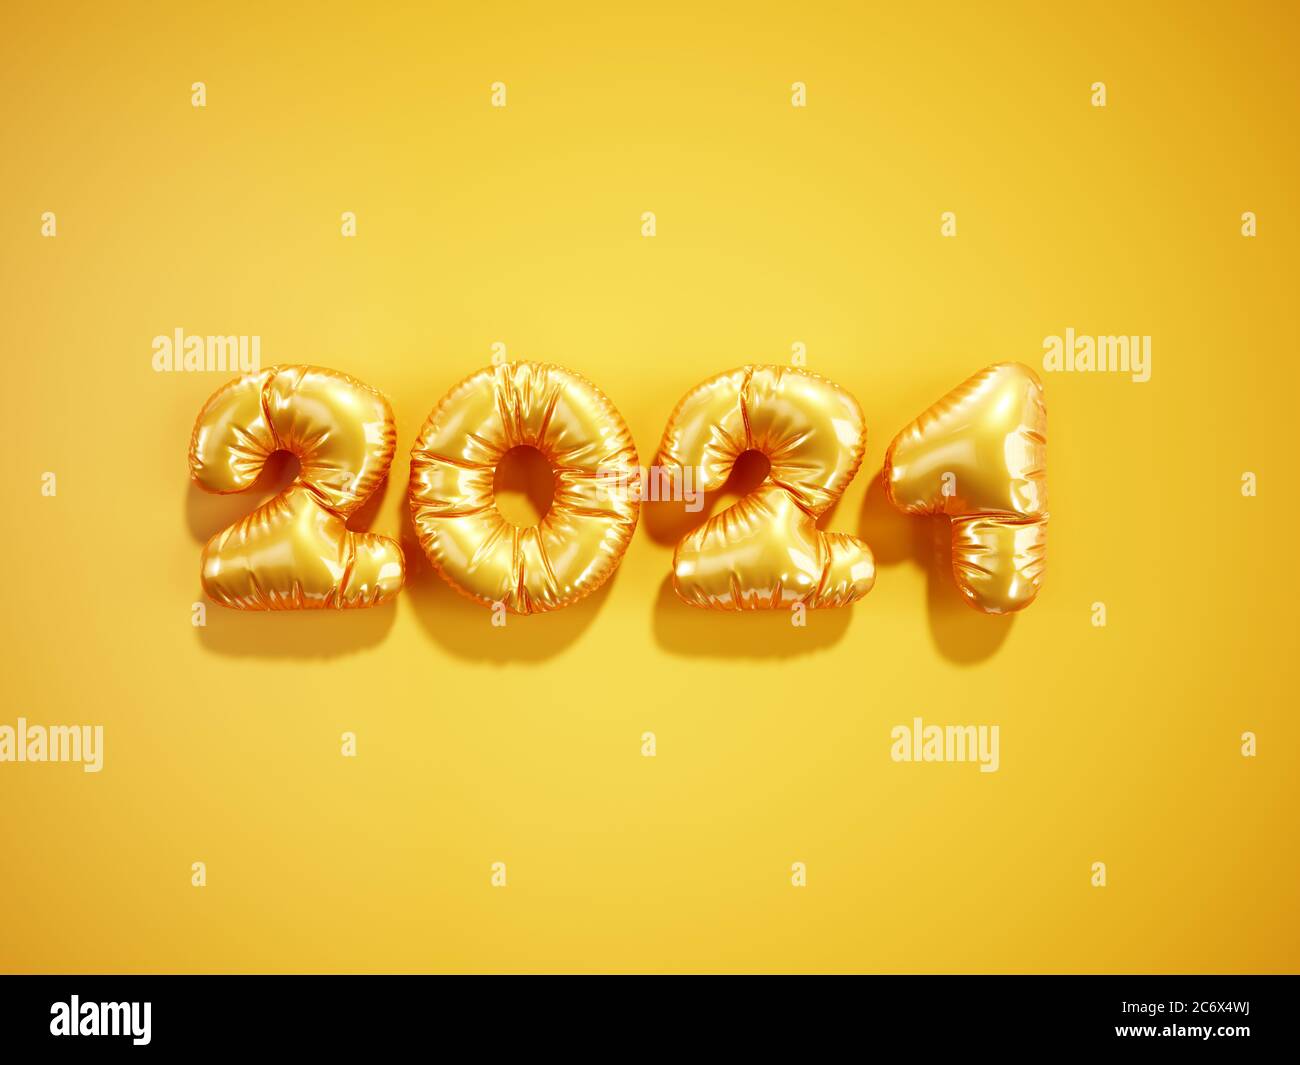 Christmas and Happy new year 2021 balloon orange golden numbers on a yellow background. 3d rendering Happy New Year 2021 logo design. Stock Photo